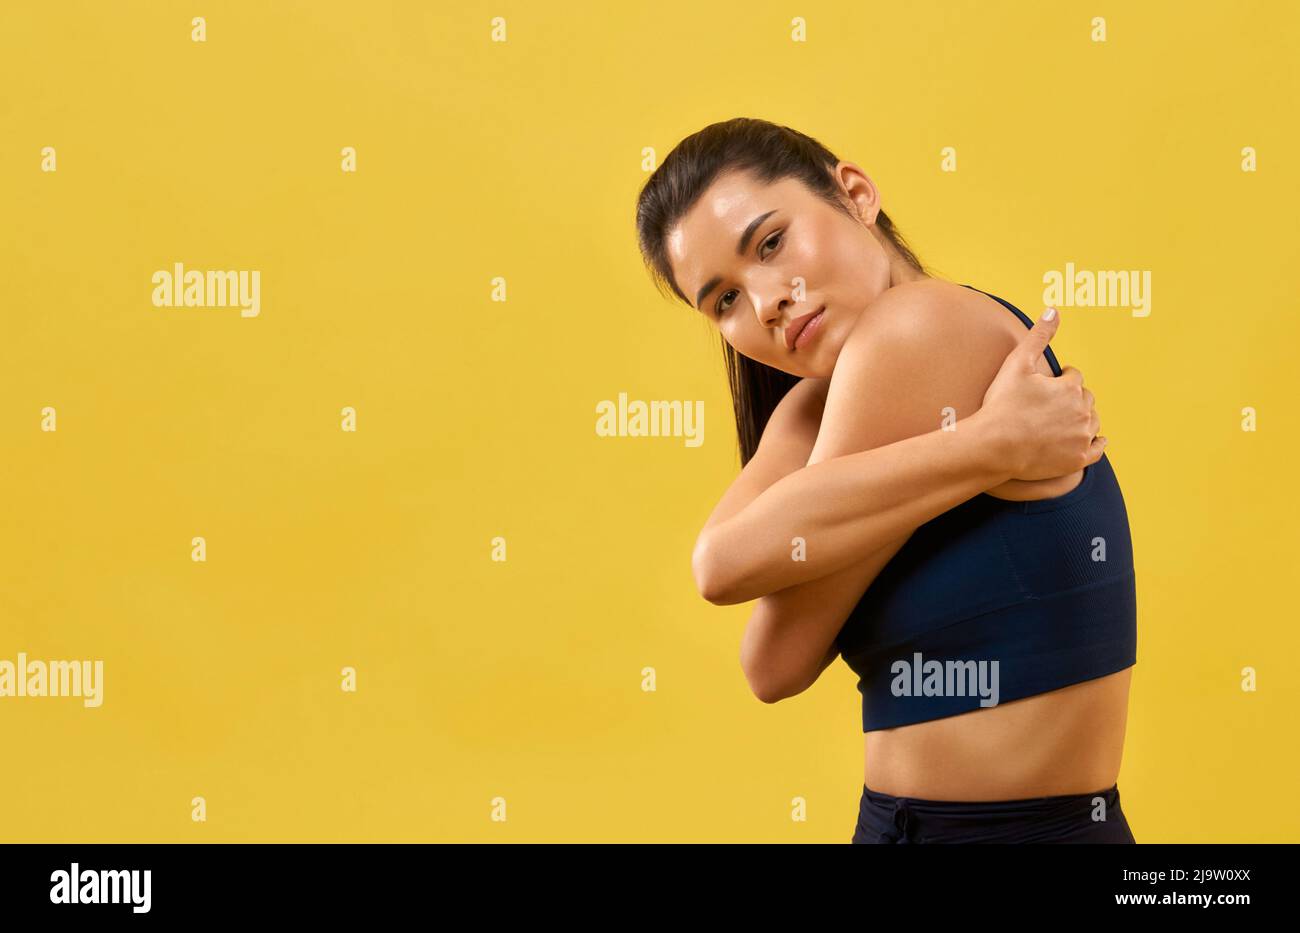 Young woman in black top tight hugging herself, thoughtfully looking at camera. Portrait view of serious girl wrapping arms around body in hug, isolated on orange background. Concept of mindfulness. Stock Photo